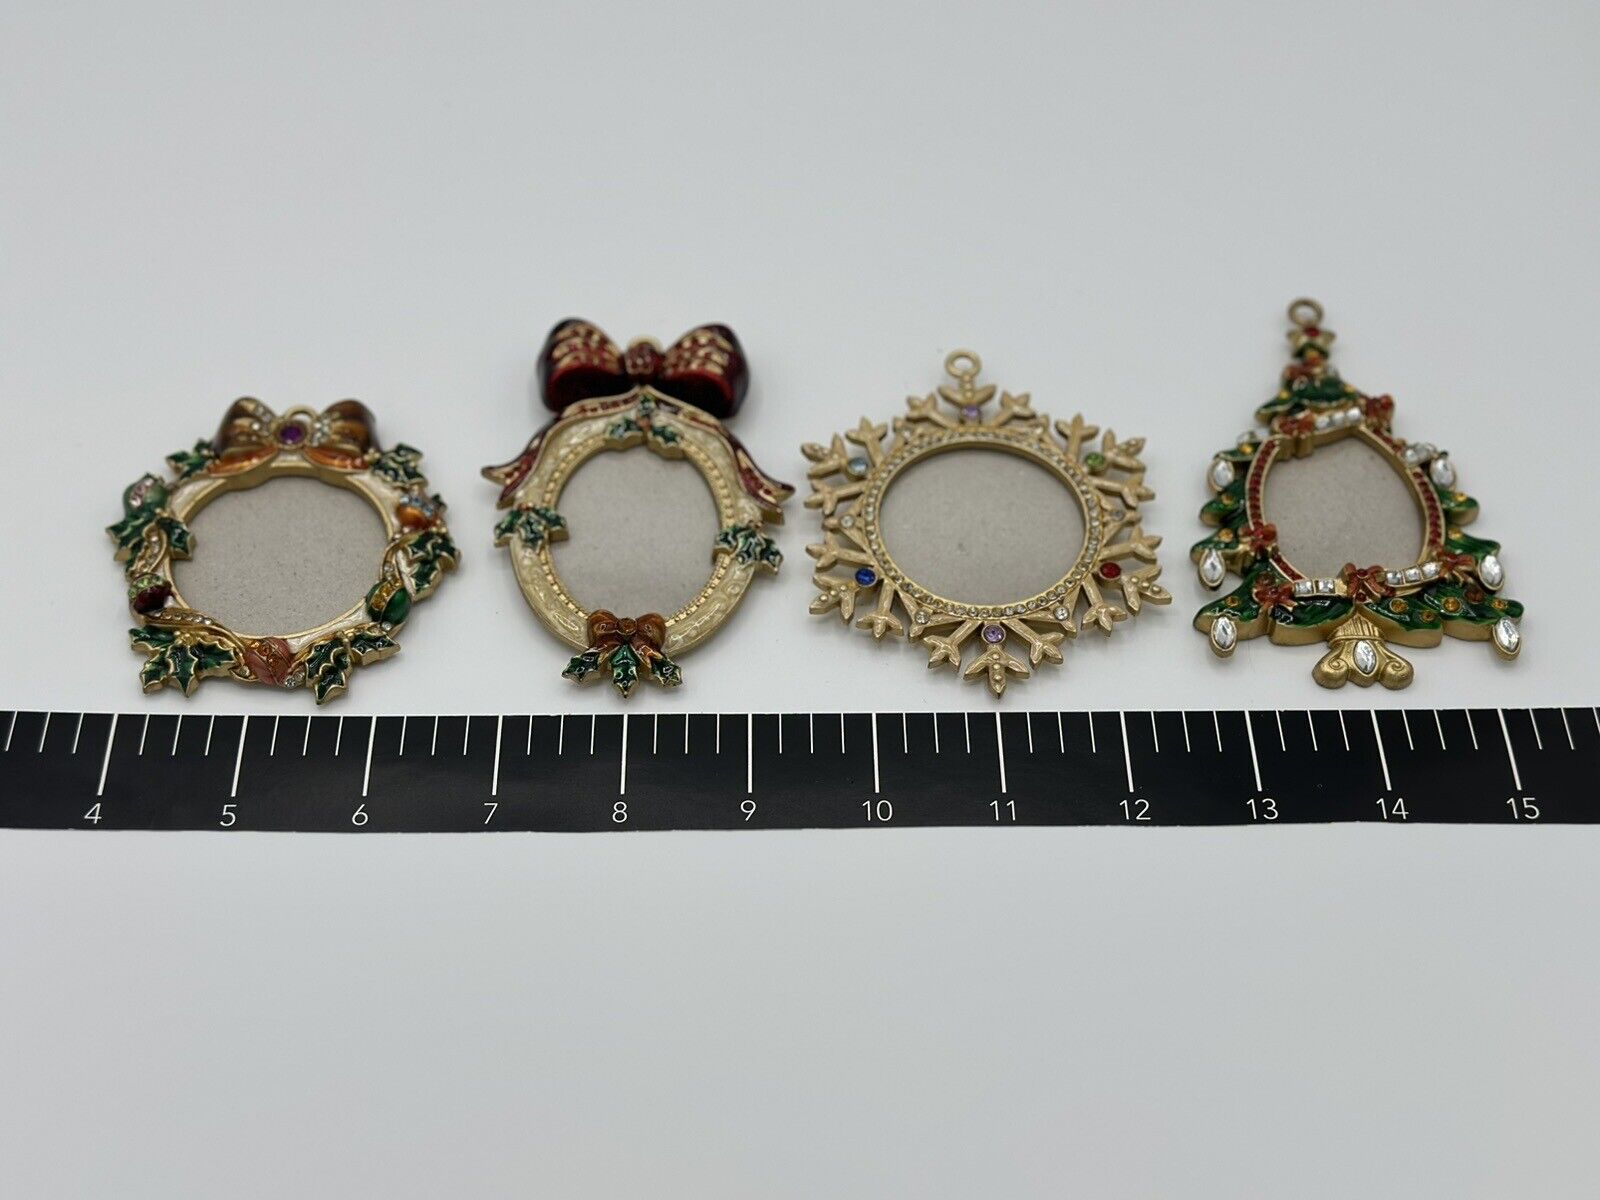  Christmas Ornament Enameled/Jeweled Picture Frame Ornament Lot (Gold Tone) 